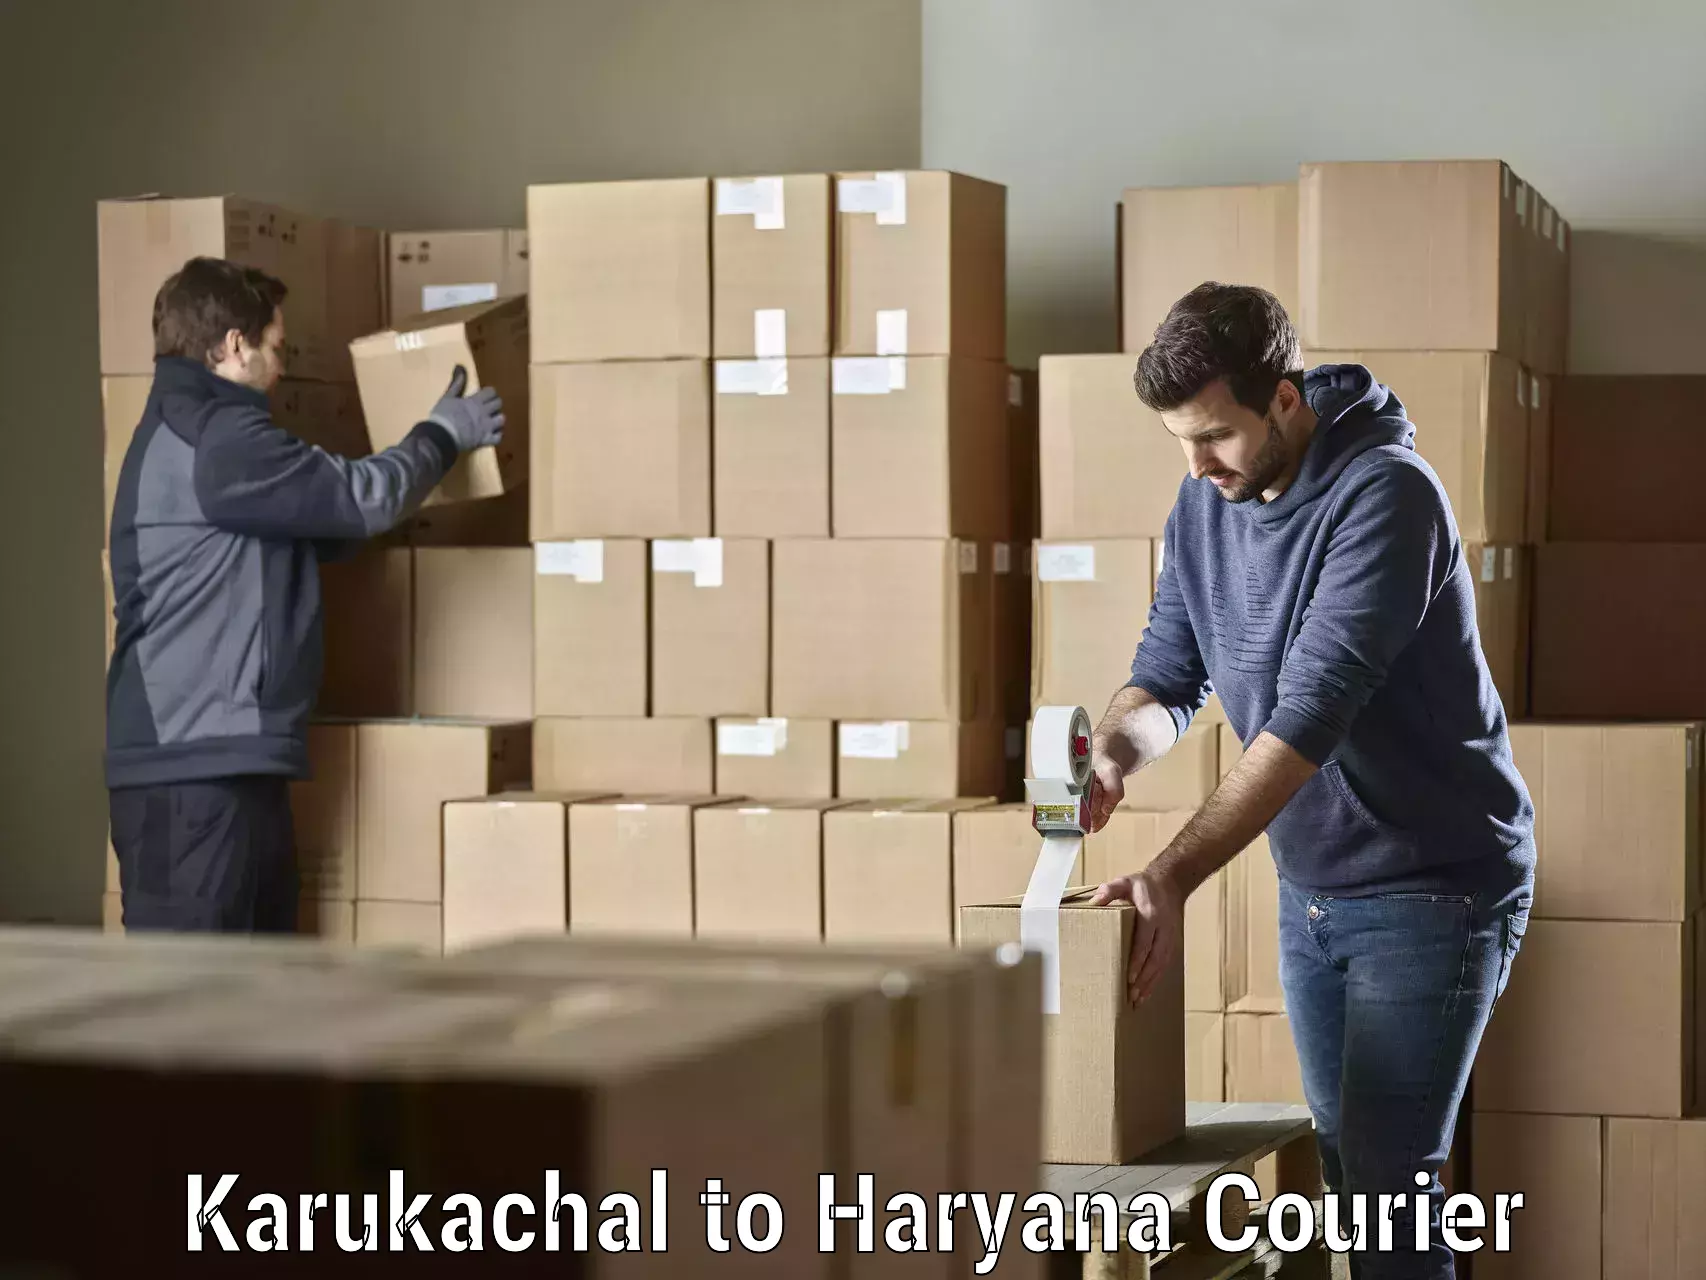 24-hour courier service Karukachal to NCR Haryana